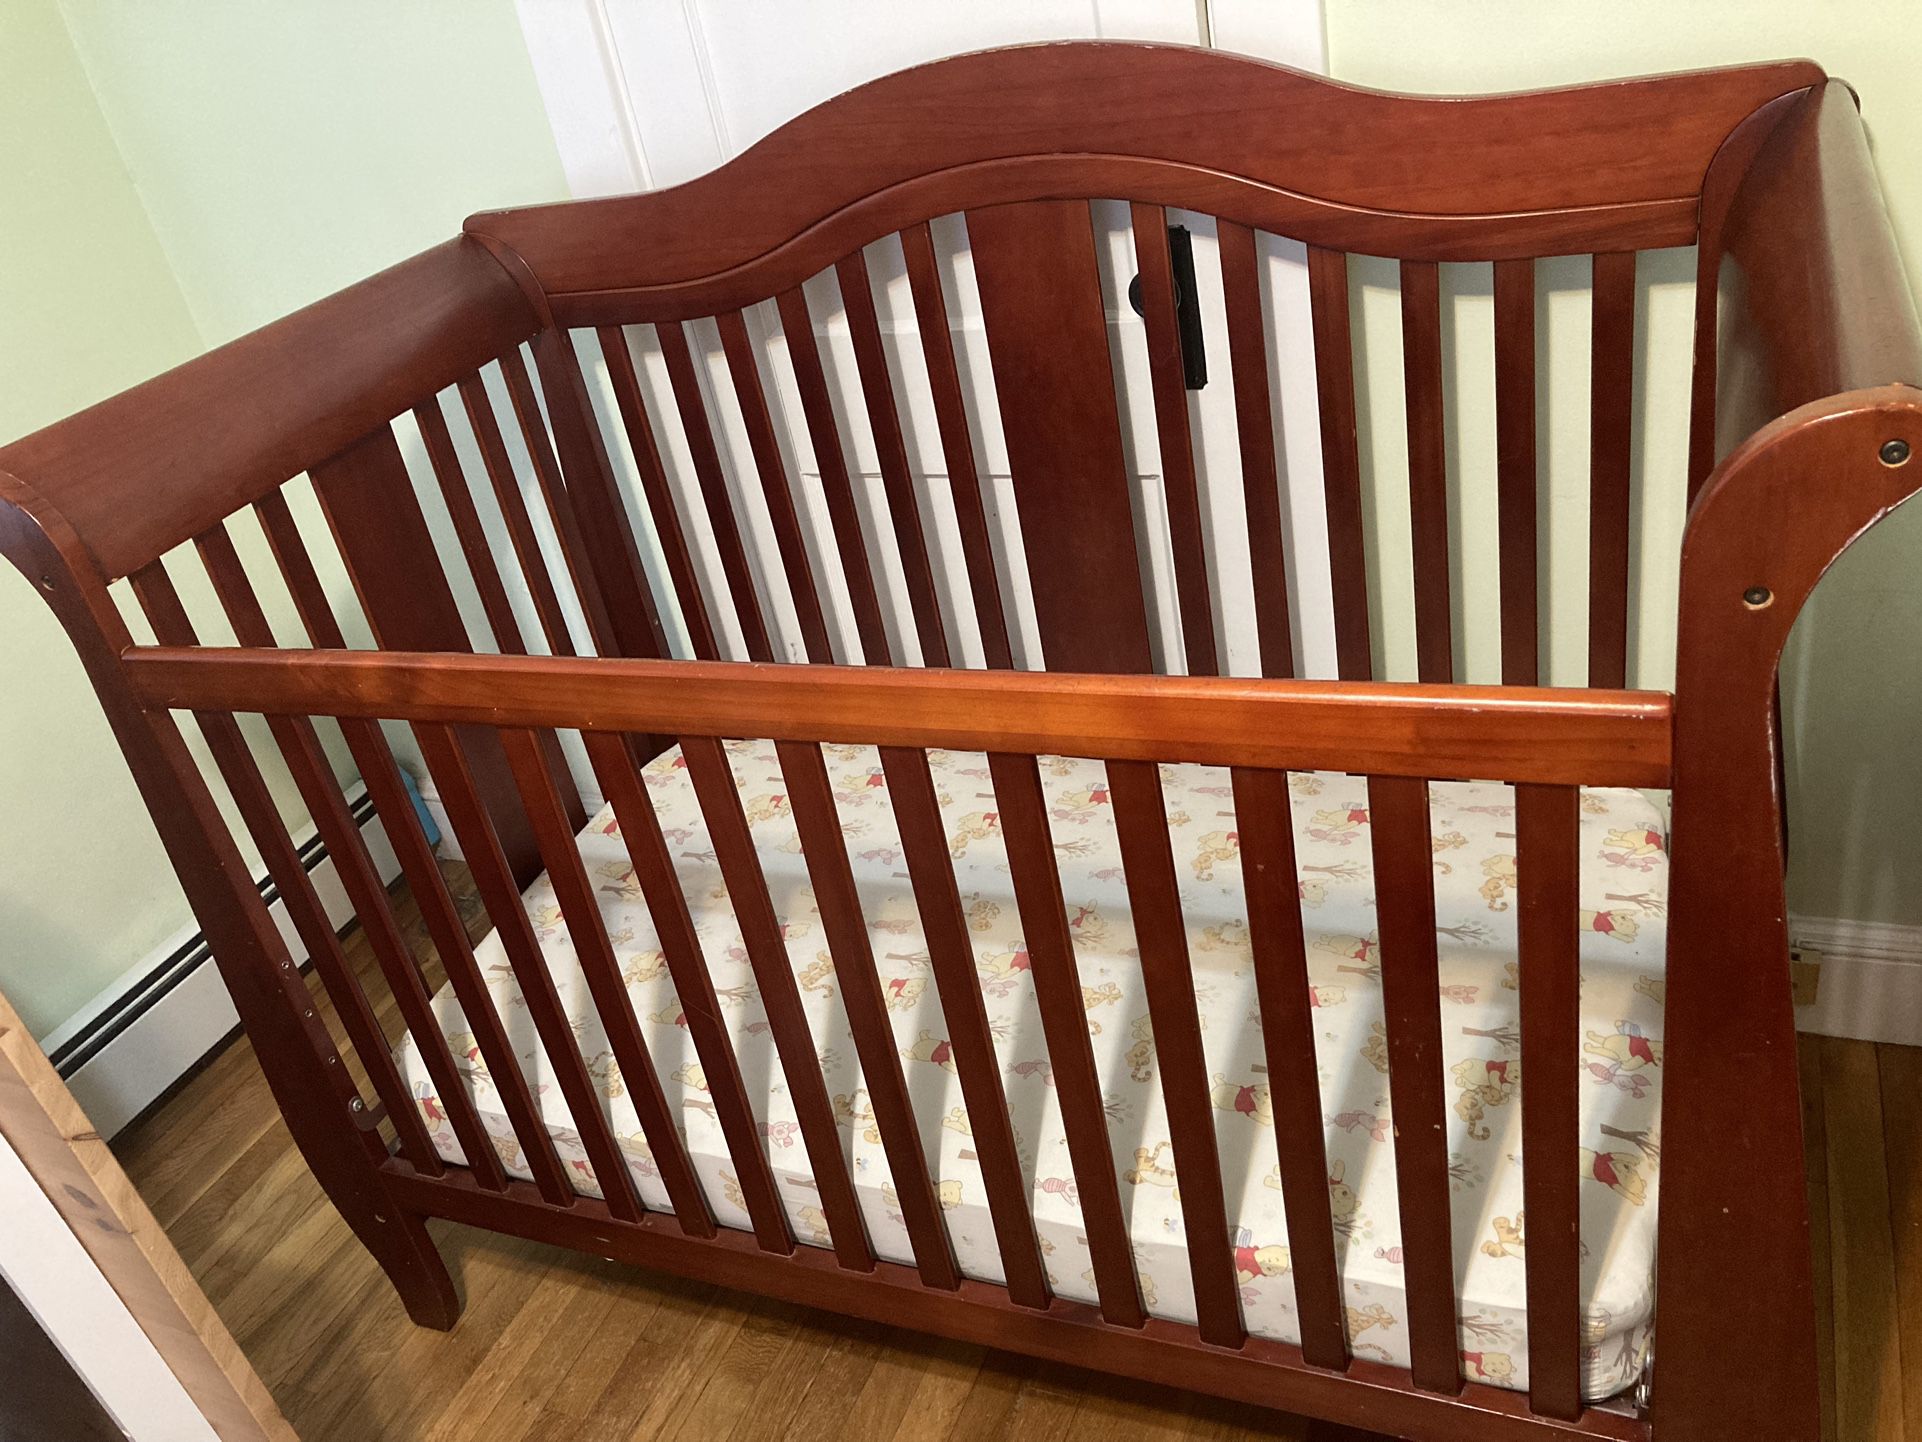 Wooden Baby Crib with Mattresses and Cover